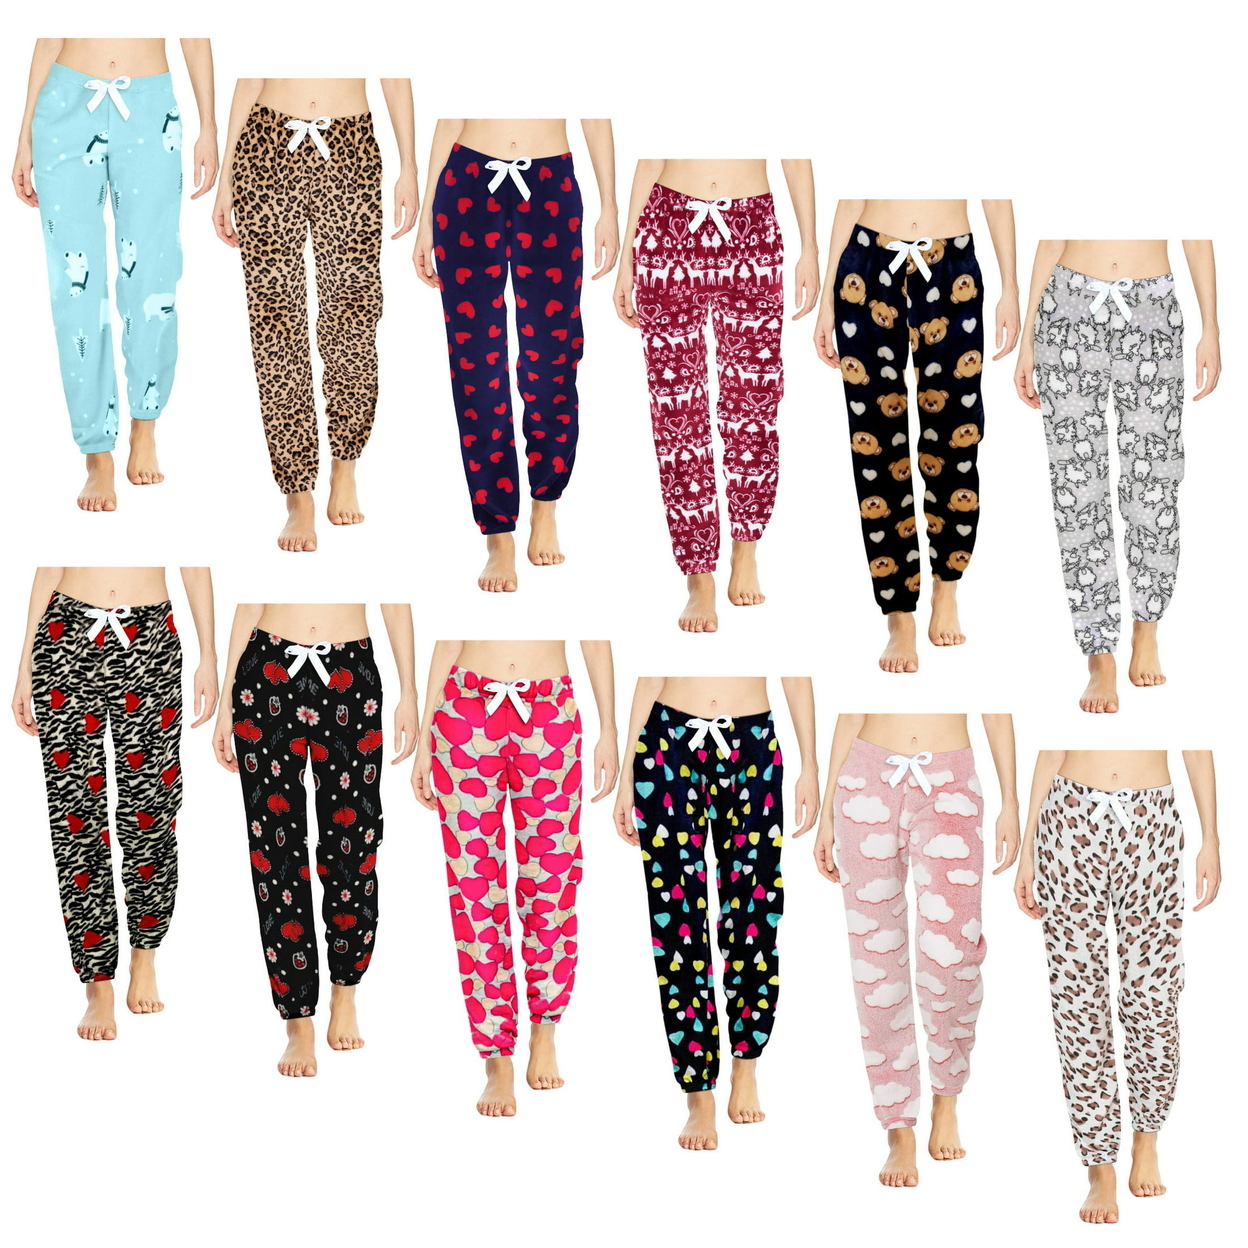 Multi-Pack: Women's Printed Ultra-Soft Comfy Stretch Micro-Fleece Pajama Lounge Pants - 3-pack, Love, Small